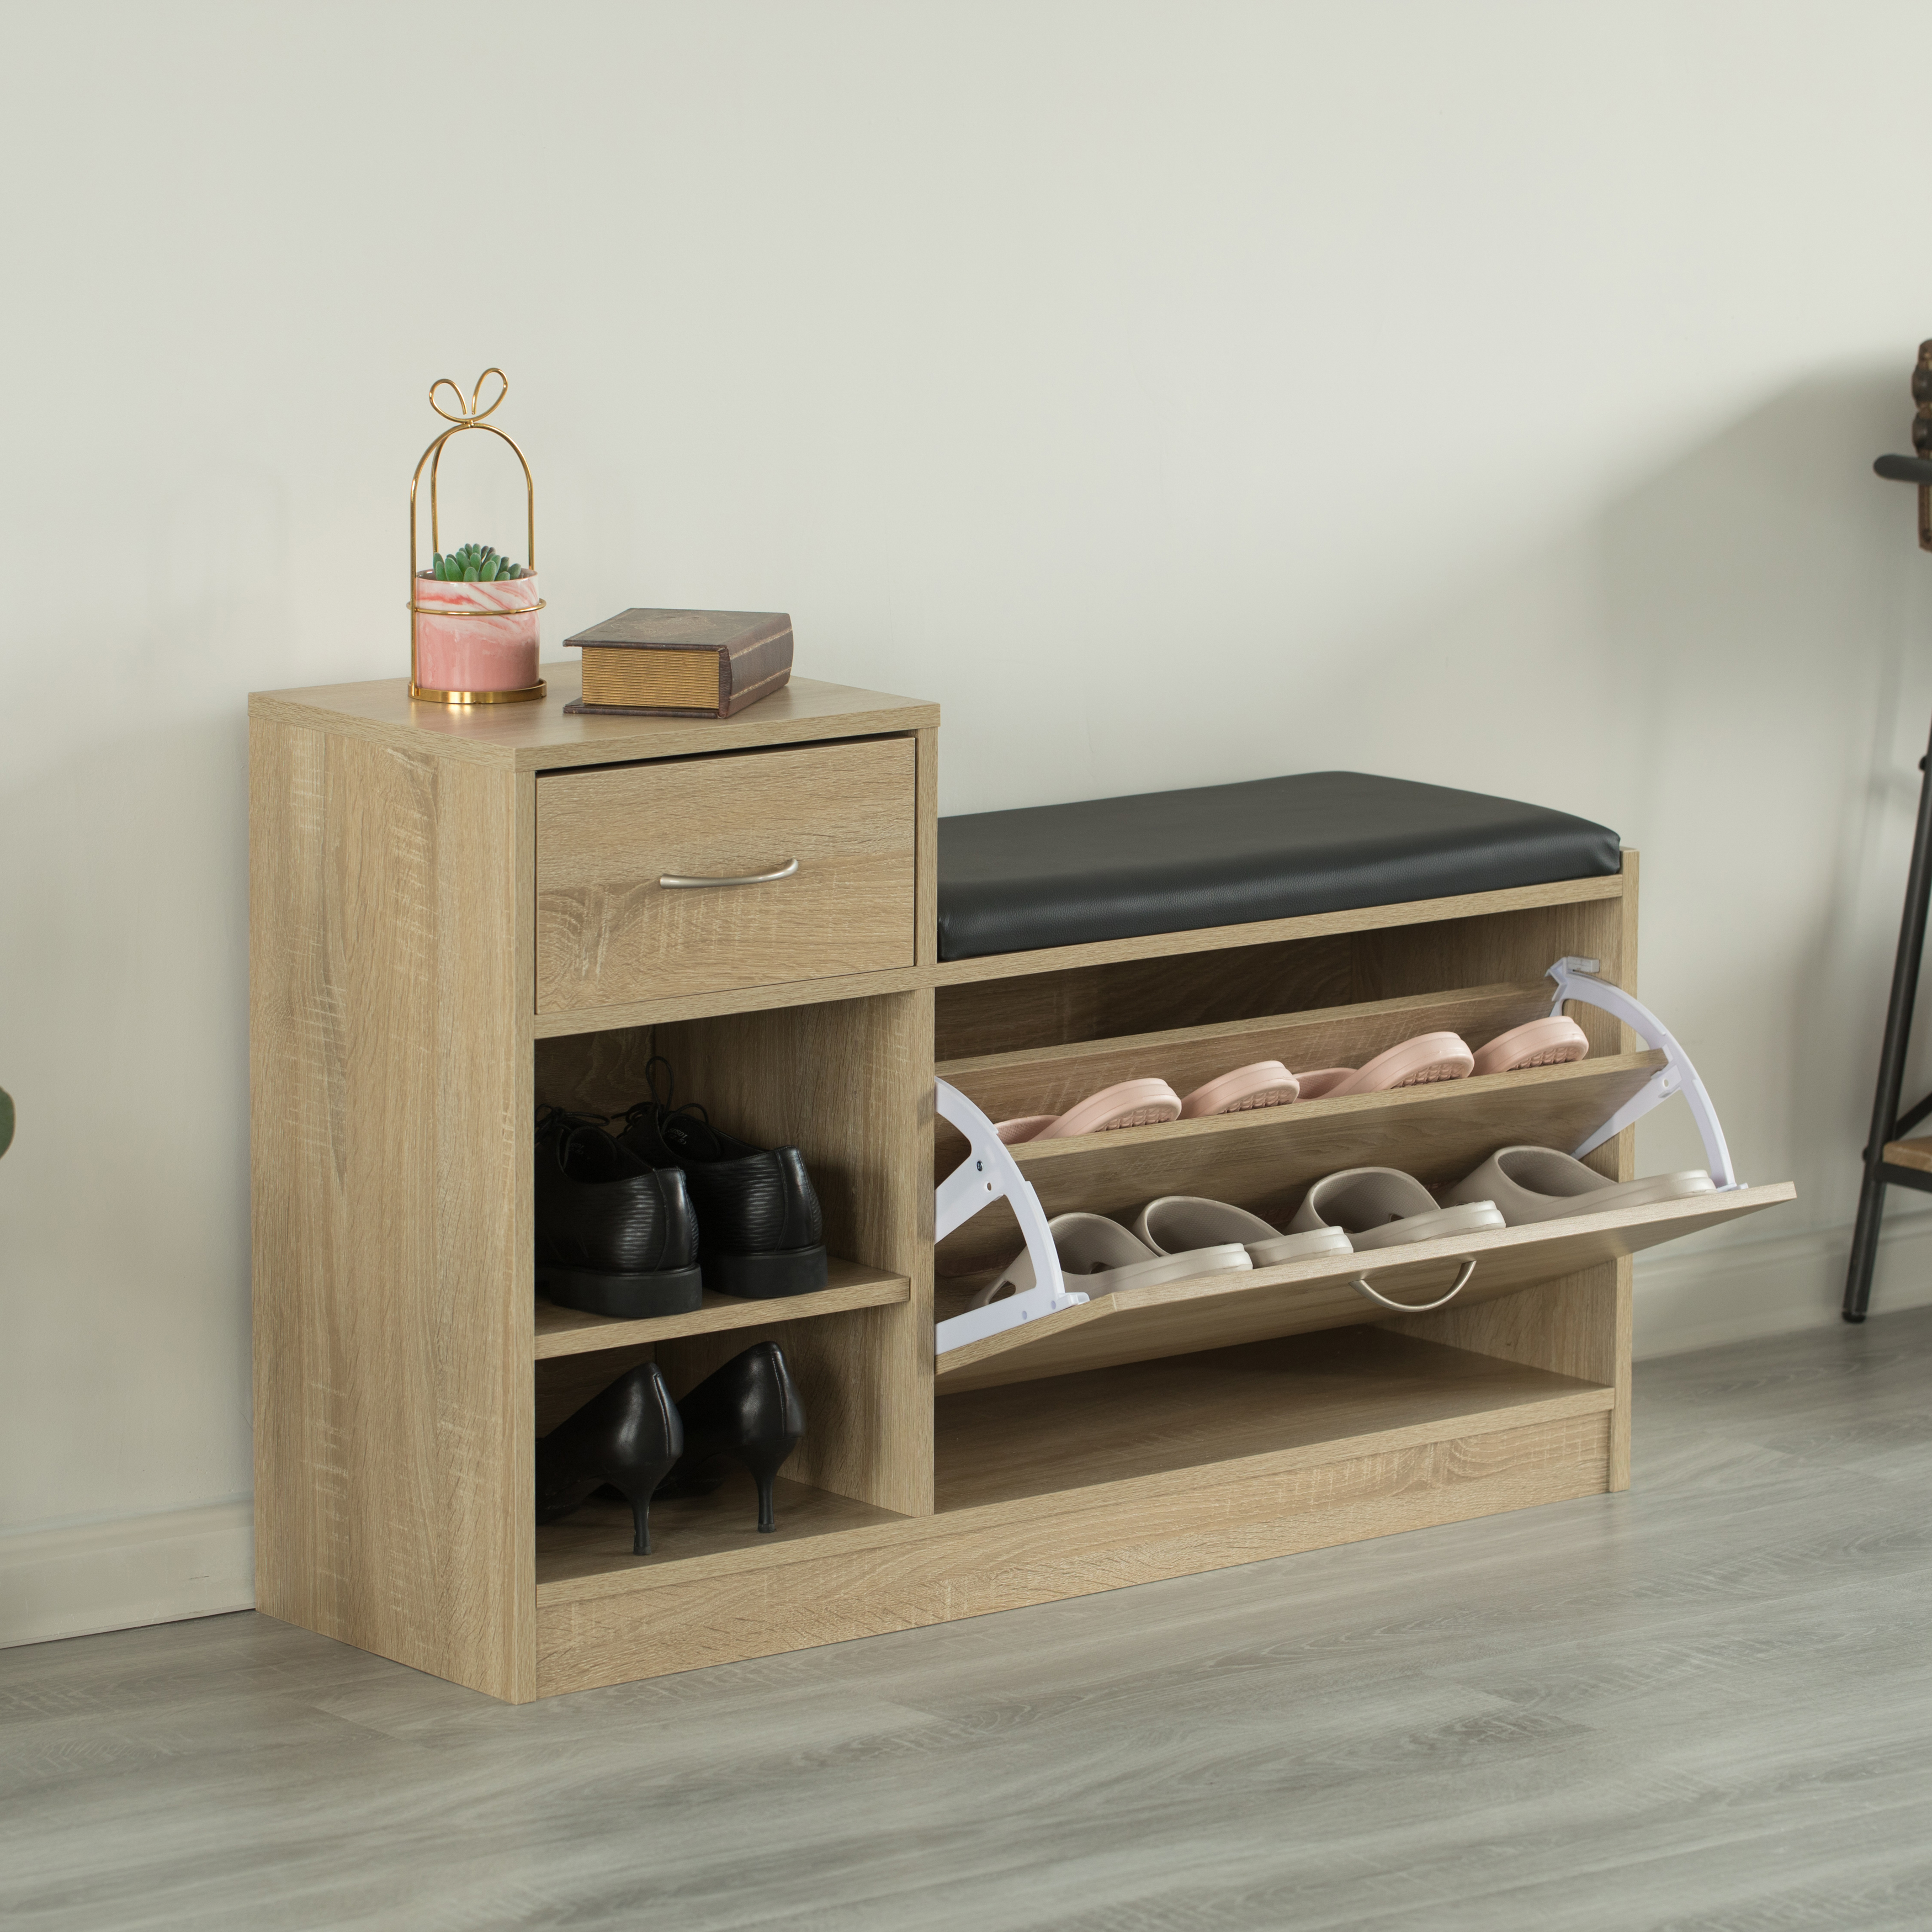 Oak Wooden Entryway Shoe Storage Bench with Cushion